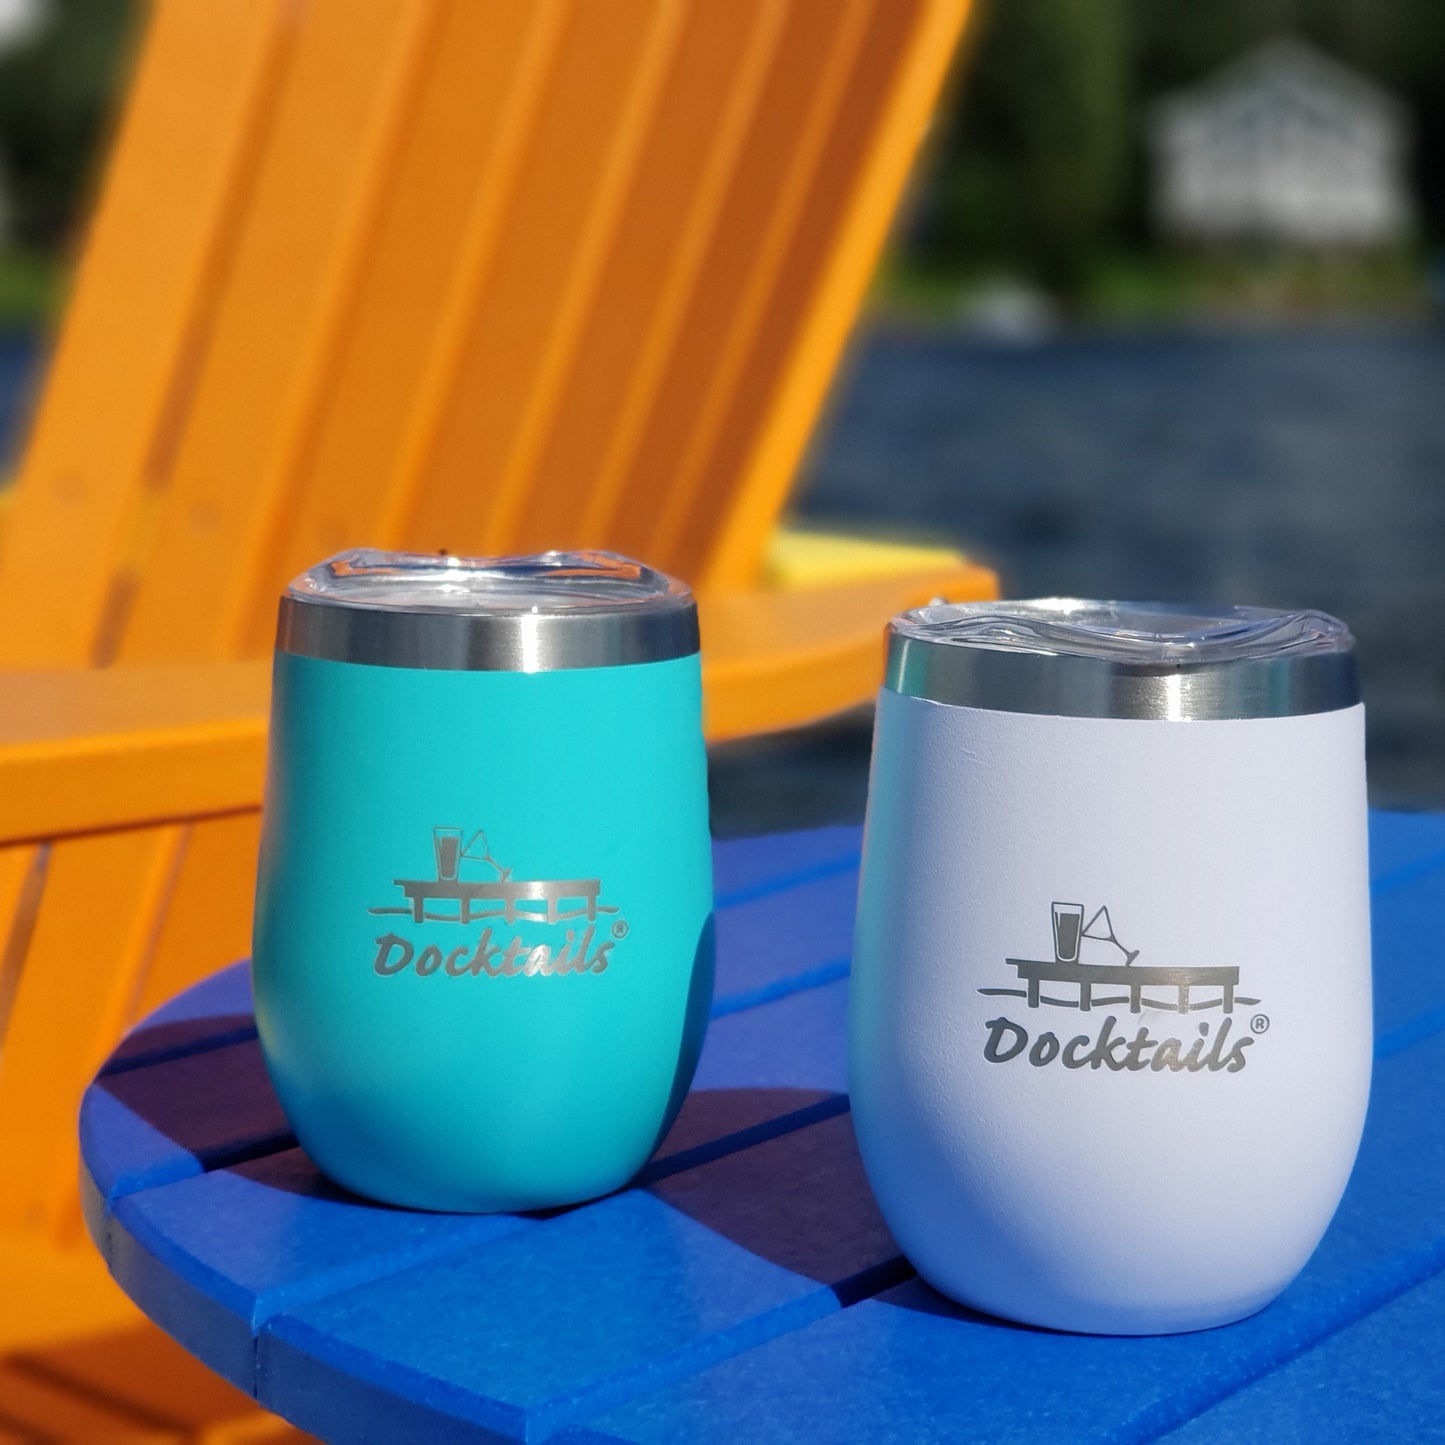 Docktails insulated wine cups in use